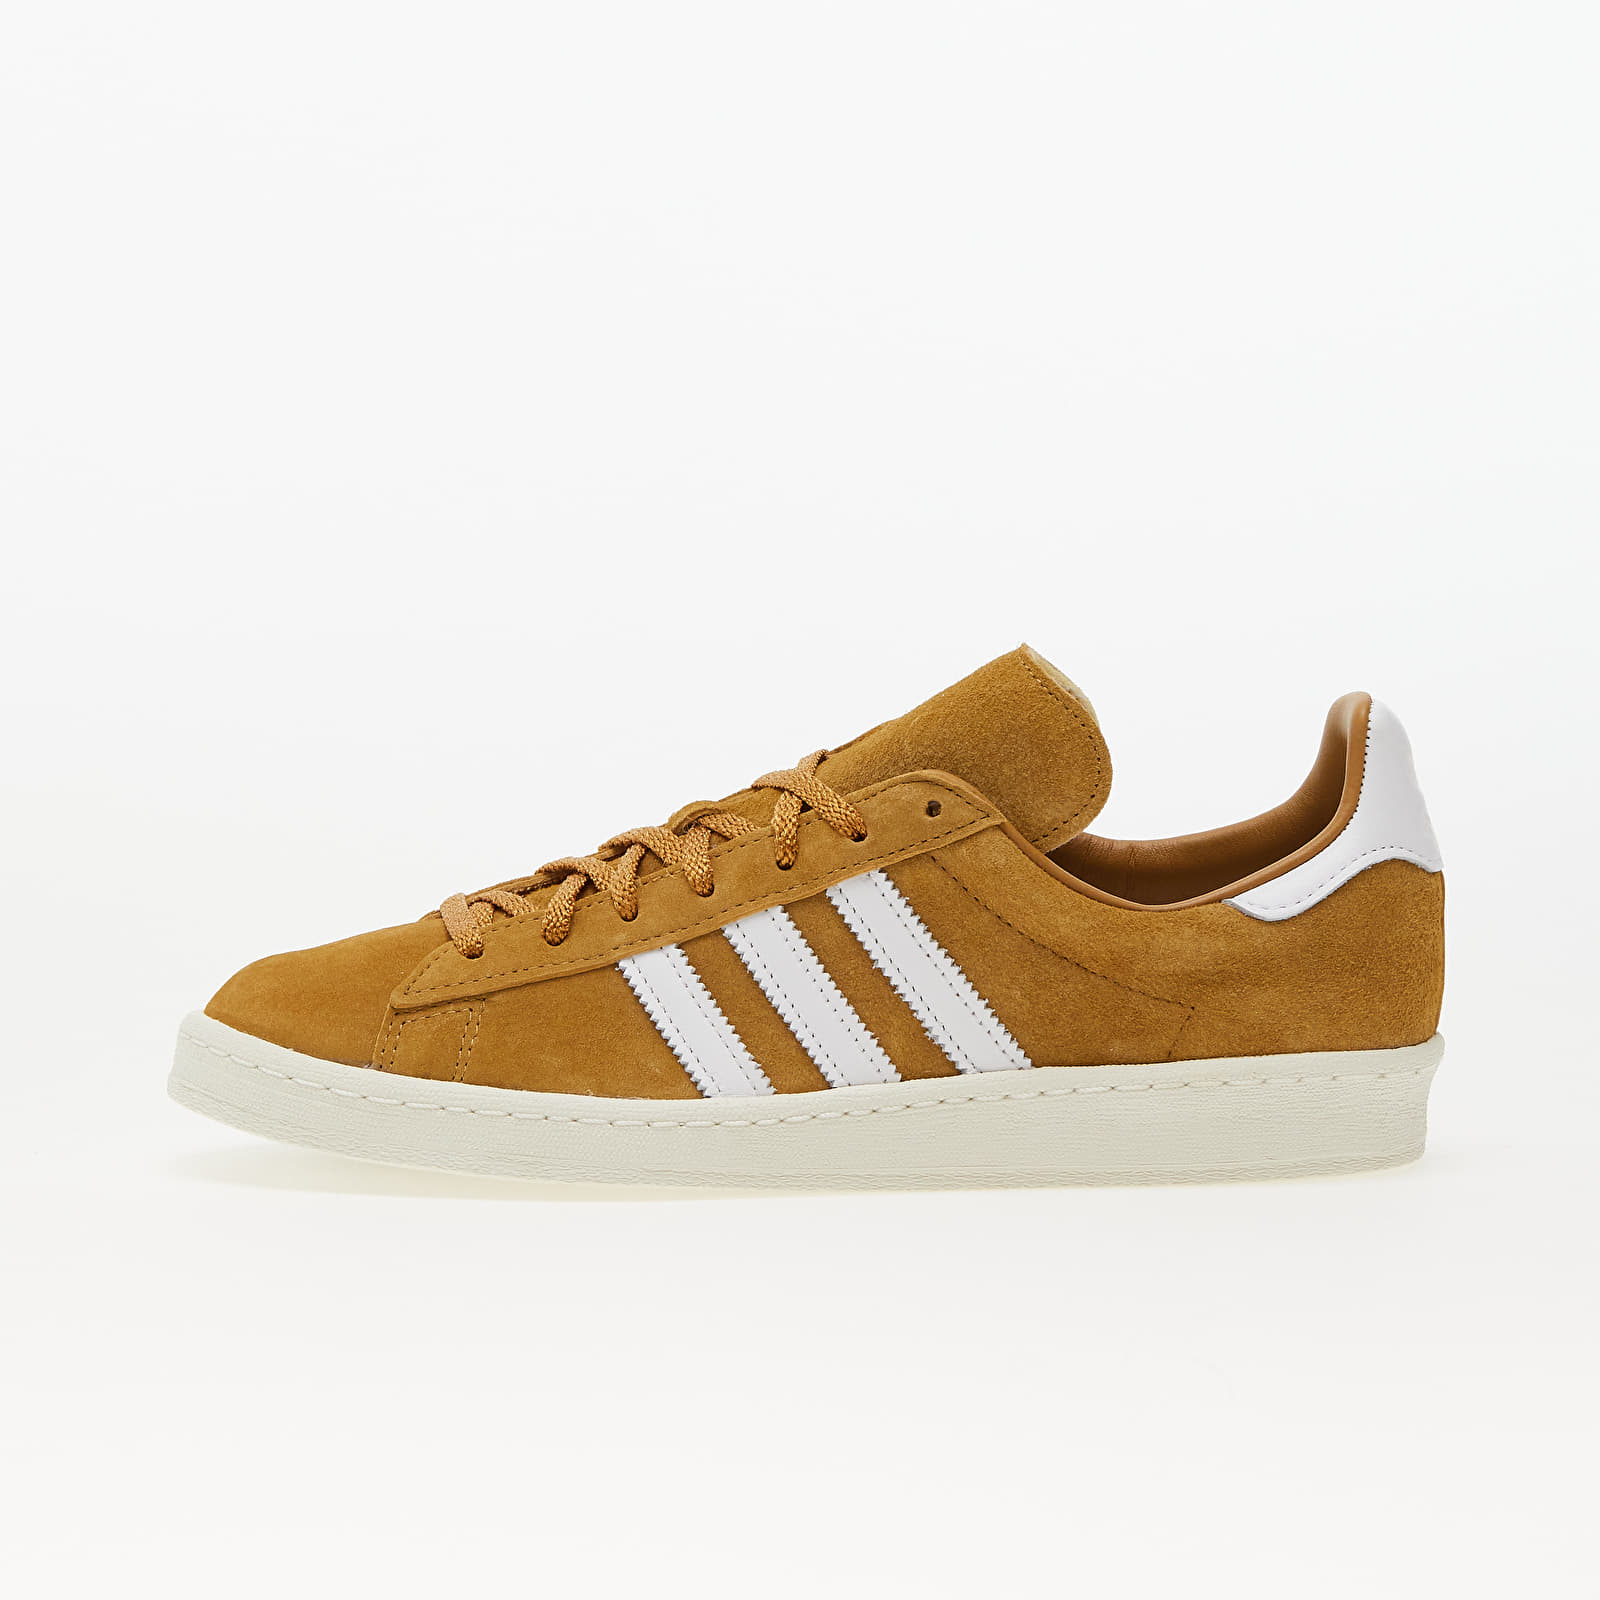 Chaussures et baskets homme adidas Campus 80s Mesa/ Ftw White/ Off White